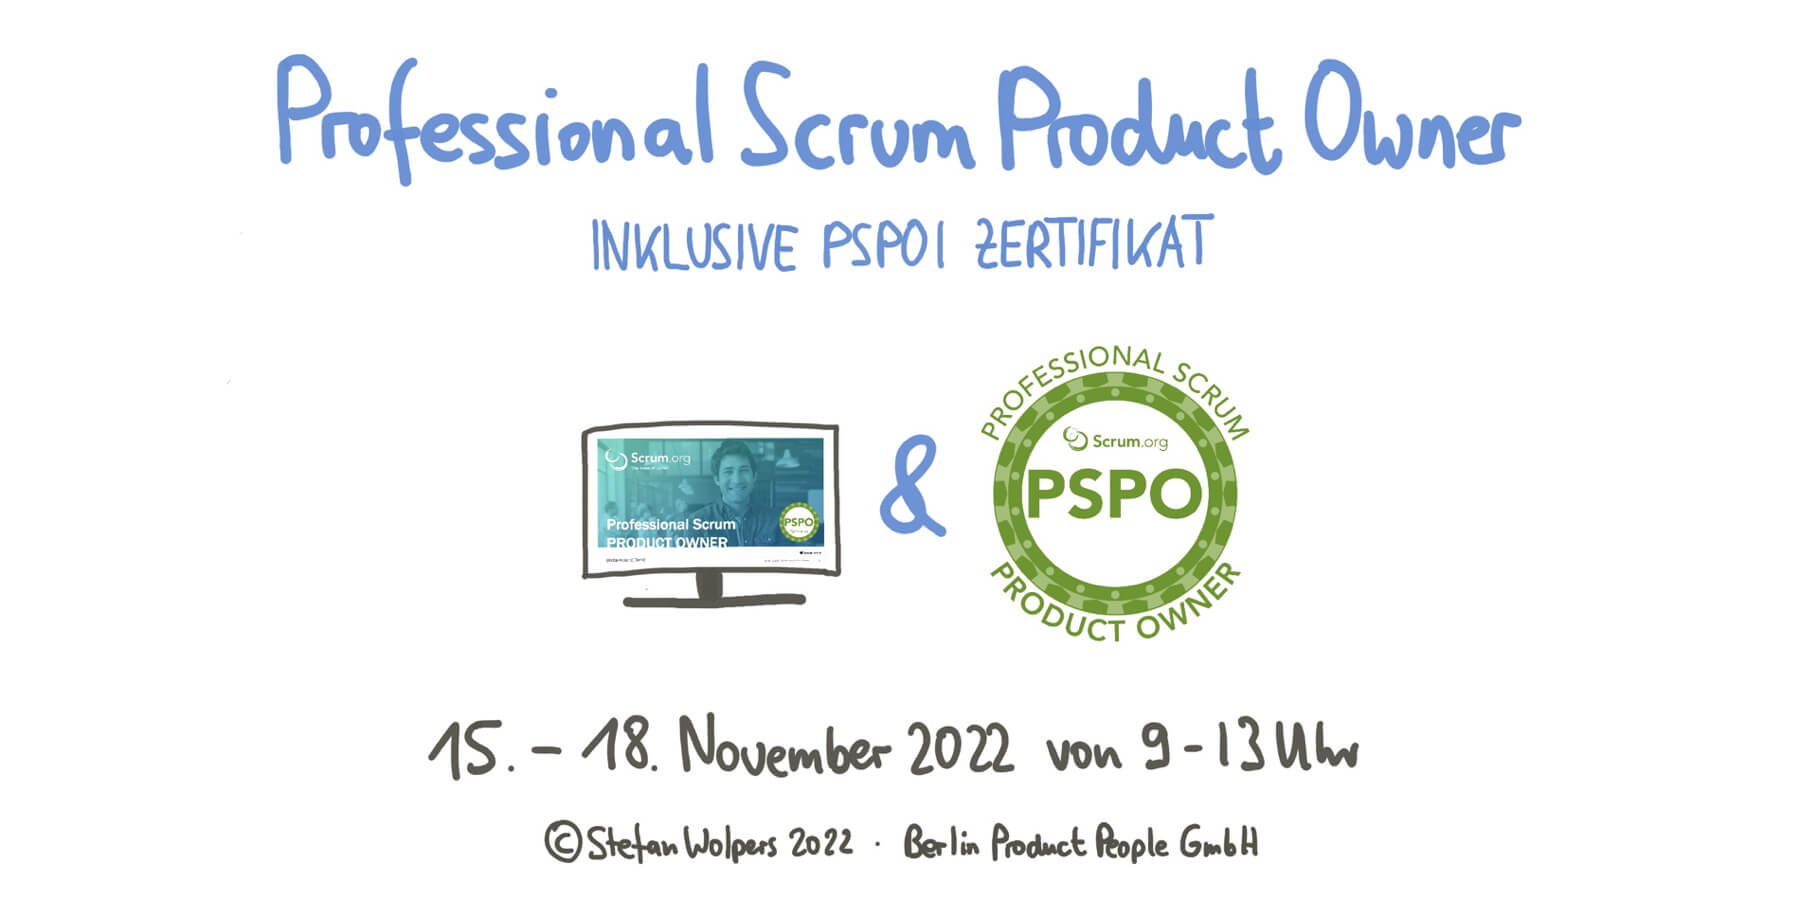 Professional Scrum Product Owner Onlineschulung mit PSPO I Zertifizierung — 15. bis 18. November 2022 — Berlin Product People GmbH